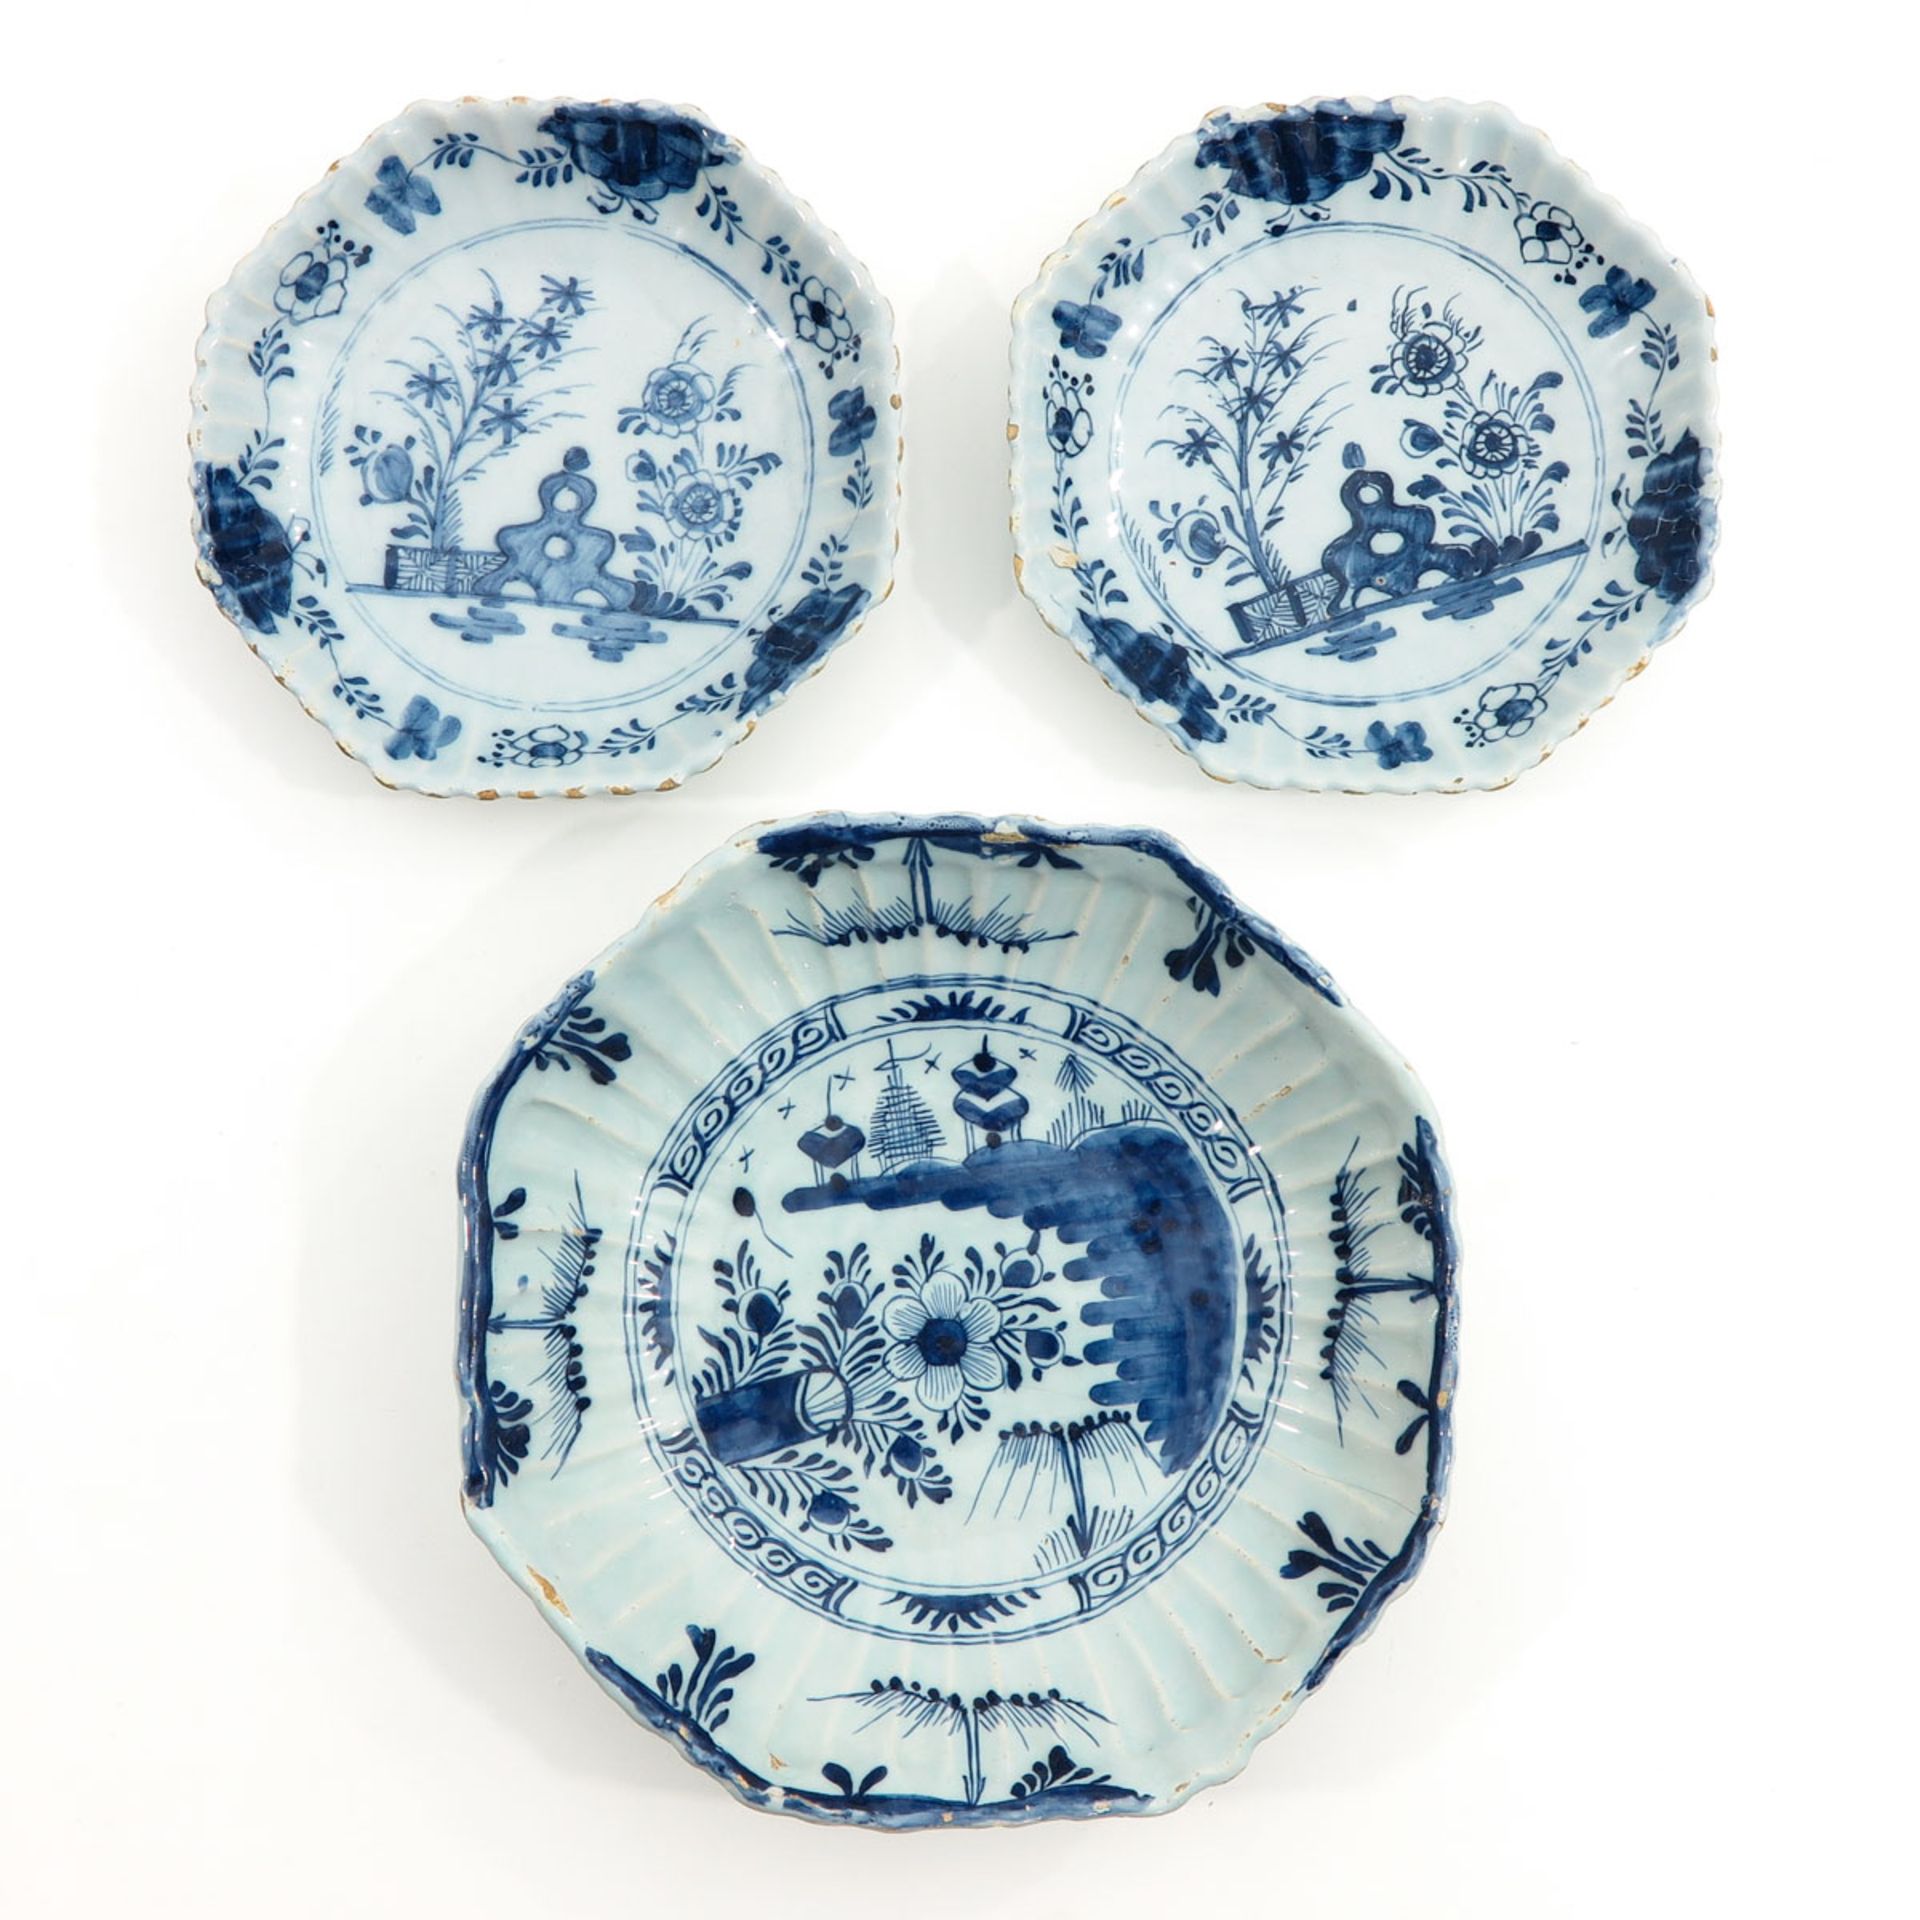 A Lot of 18th Century Delft Plates